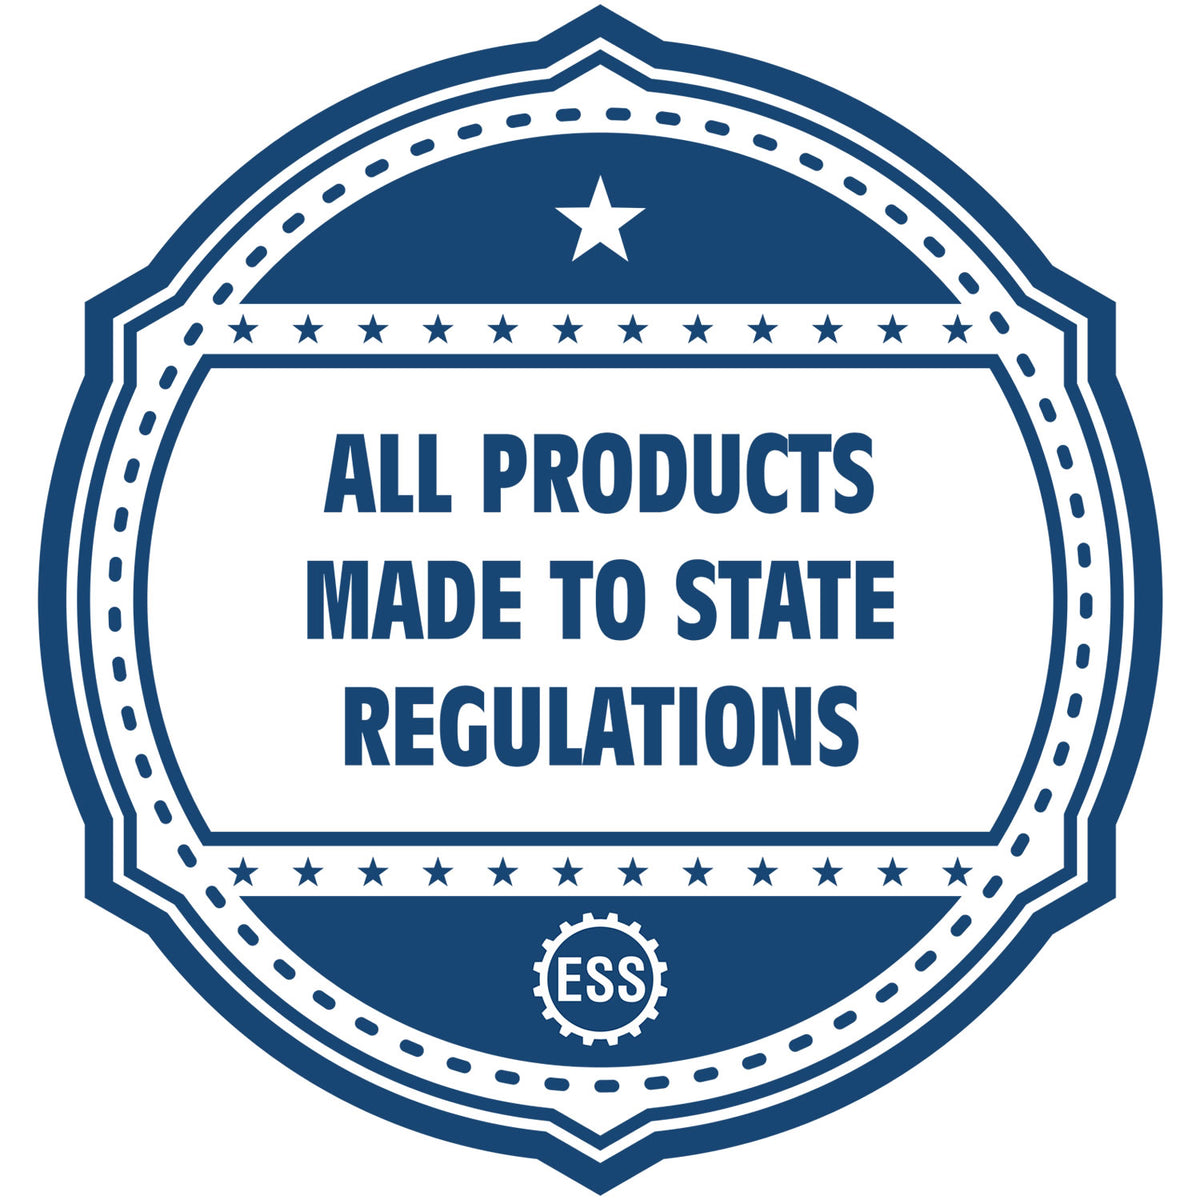 An icon or badge element for the Slim Pre-Inked Colorado Land Surveyor Seal Stamp showing that this product is made in compliance with state regulations.